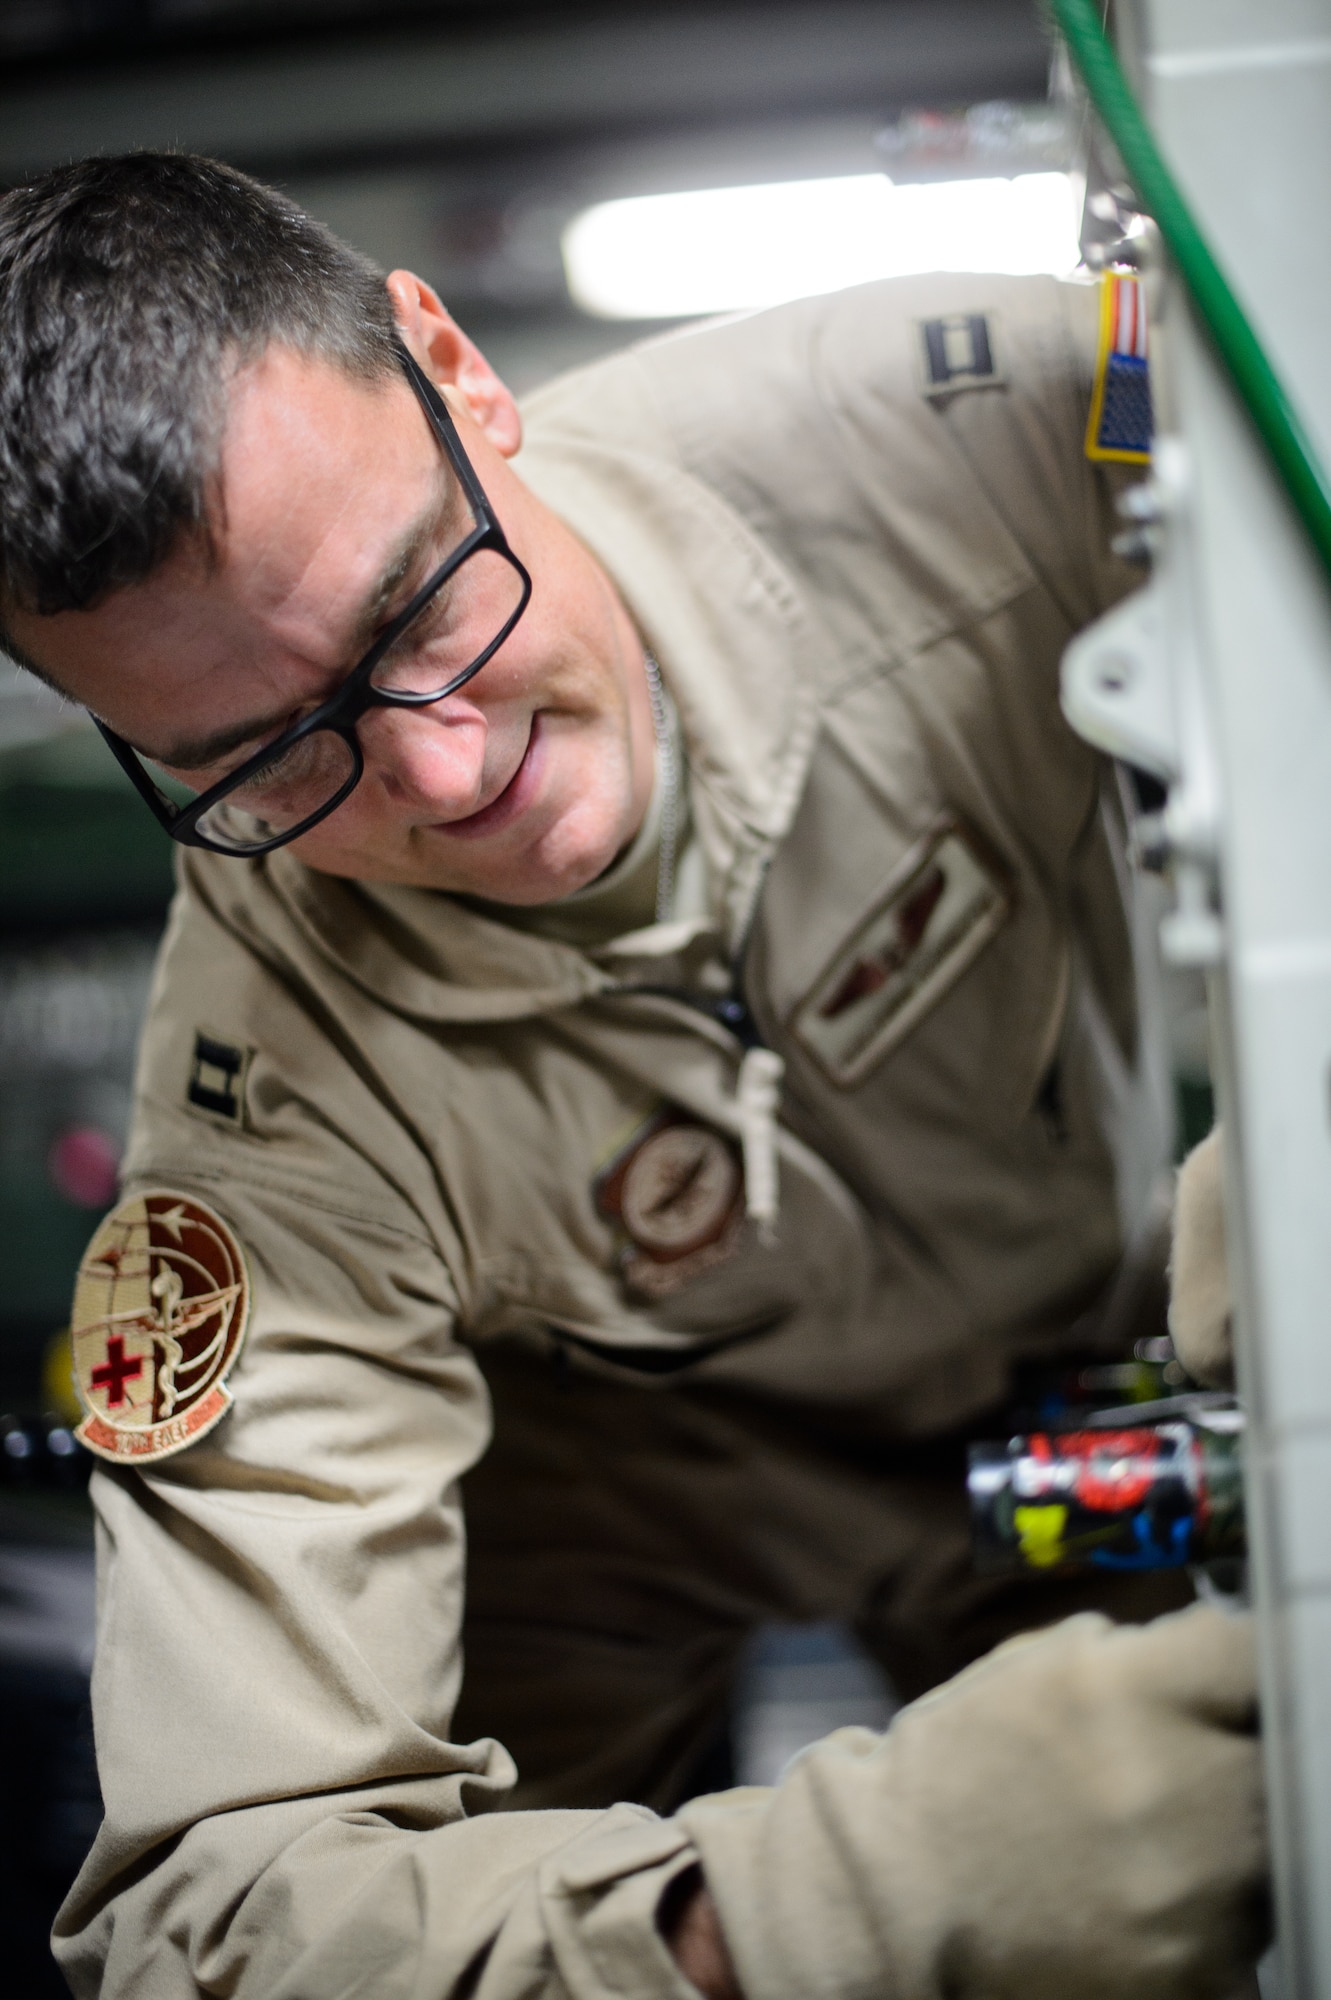 Capt. Benjamin Schultze, 10th Expeditionary Aeromedical Evacuation Flight nurse, secures a litter carrying medical equipment Nov. 10, 2015, at Ramstein Air Base, Germany. After configuring the inside of the C-17 Globemaster III into a flying ambulance, the Airmen test their equipment to ensure they can provide the best possible treatment while flying thousands of feet in the air. The 10th EAEF is a mixture of active-duty, reserve and guard Airmen deployed to Ramstein, constantly flying to war zones to retrieve patients needing higher levels of medical care. (U.S. Air Force photo/Staff Sgt. Armando A. Schwier-Morales)